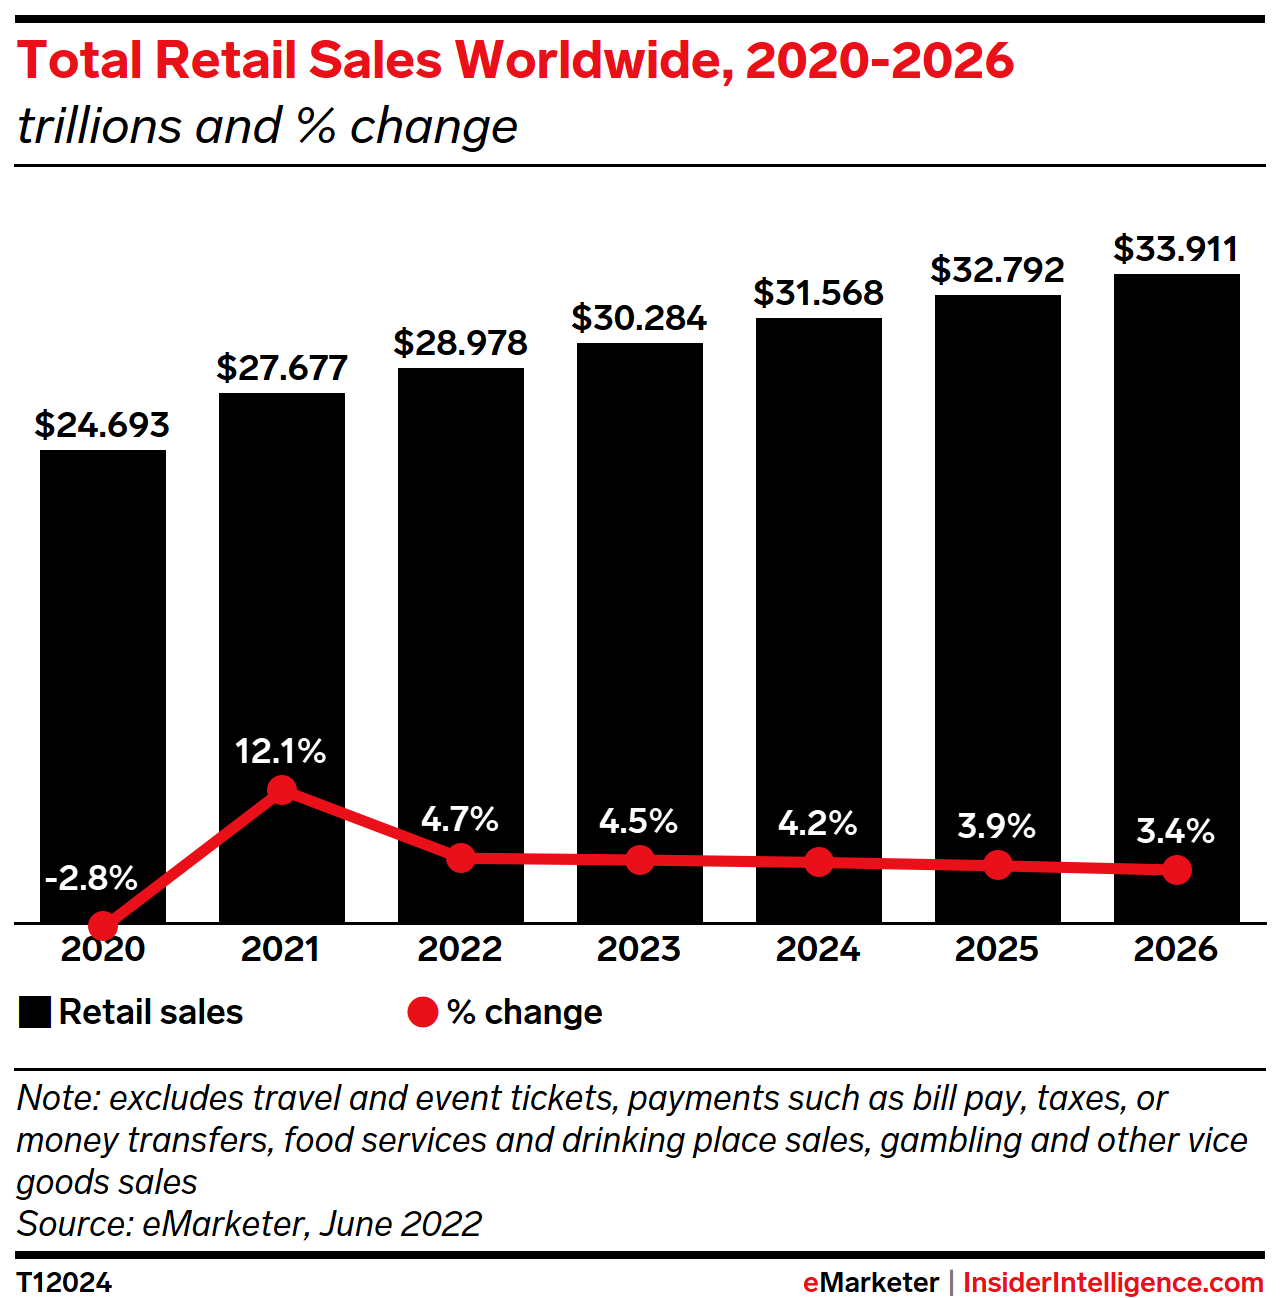 Total Retail Sales Worldwide, 2020-2026 (trillions and % change)